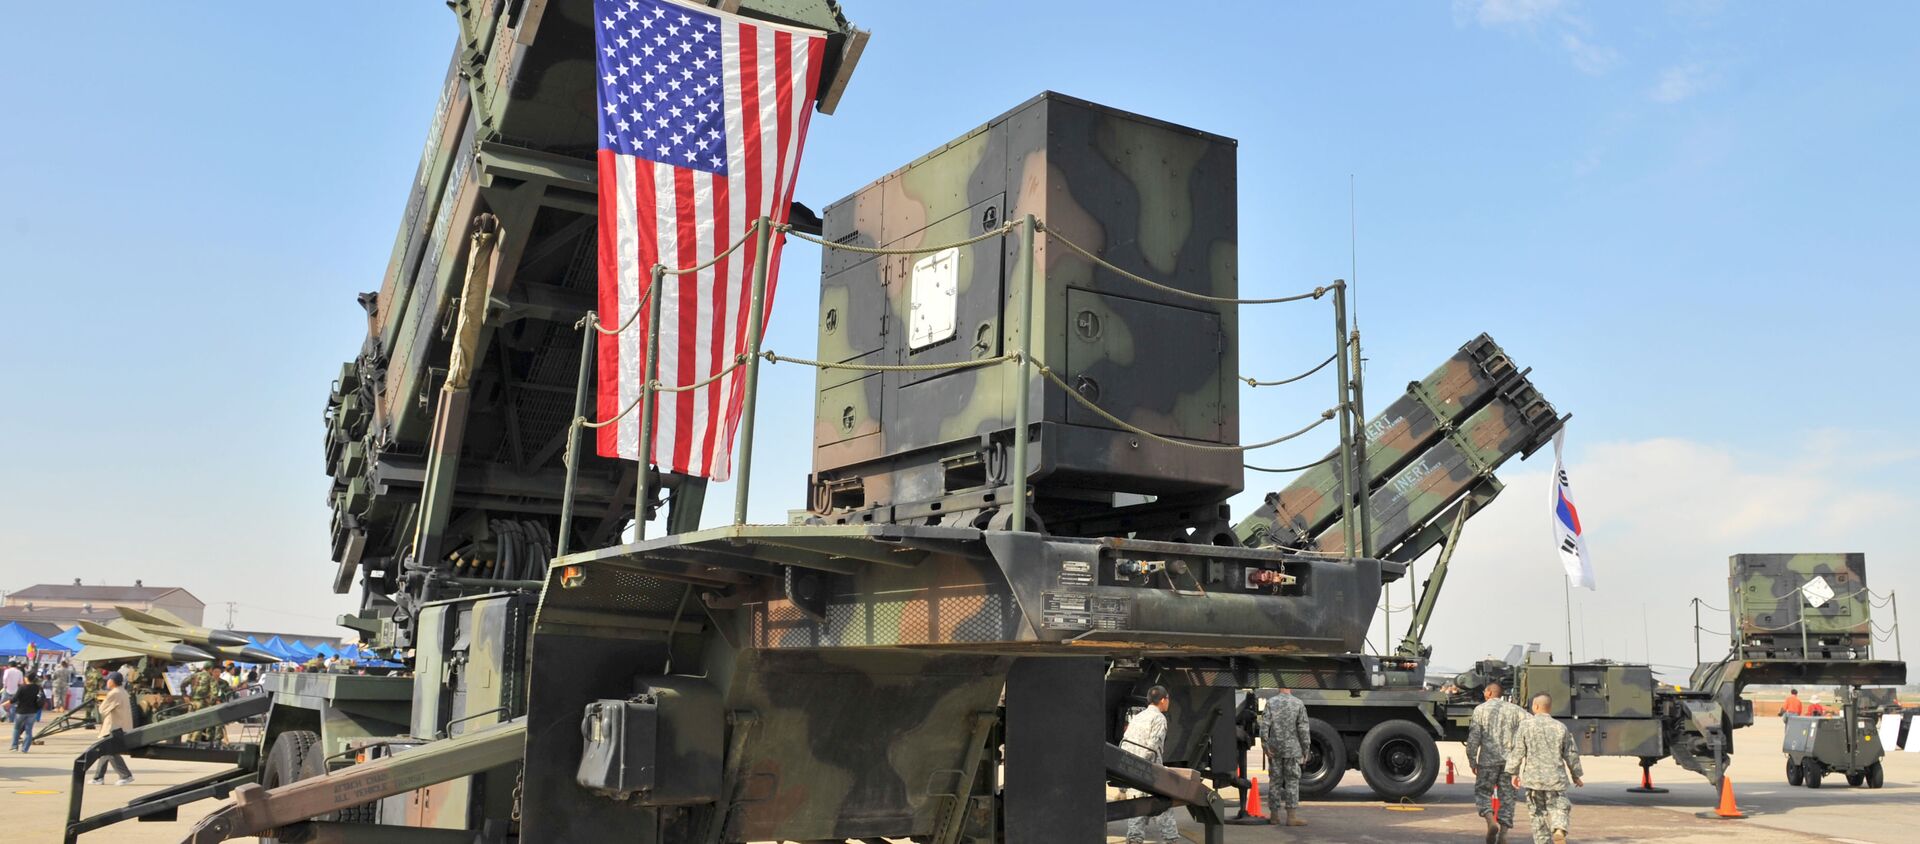 A US Army's Patriot Surface-to Air missile system is displayed during the Air Power Day at the US airbase in Osan, south of Seoul on October 12, 2008 - Sputnik Moldova, 1920, 19.10.2020